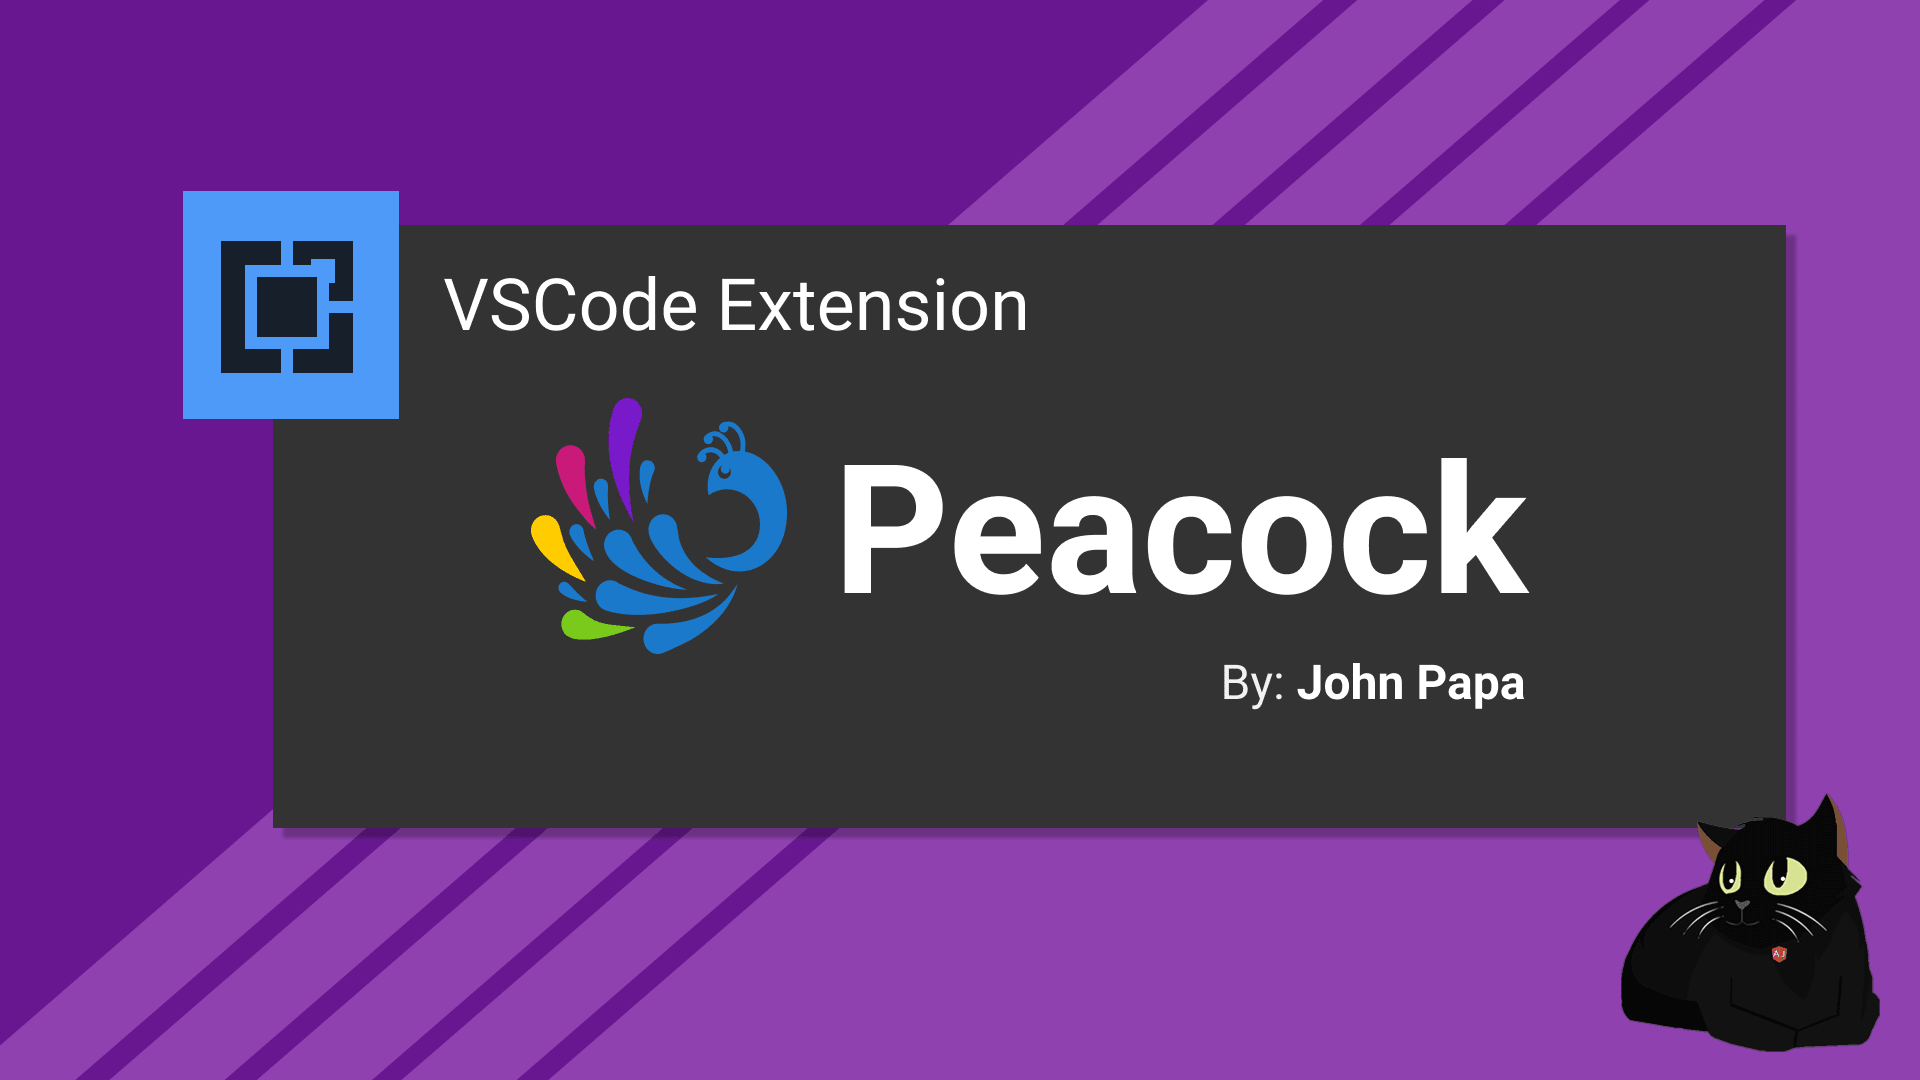 VSCode Extension Peacock